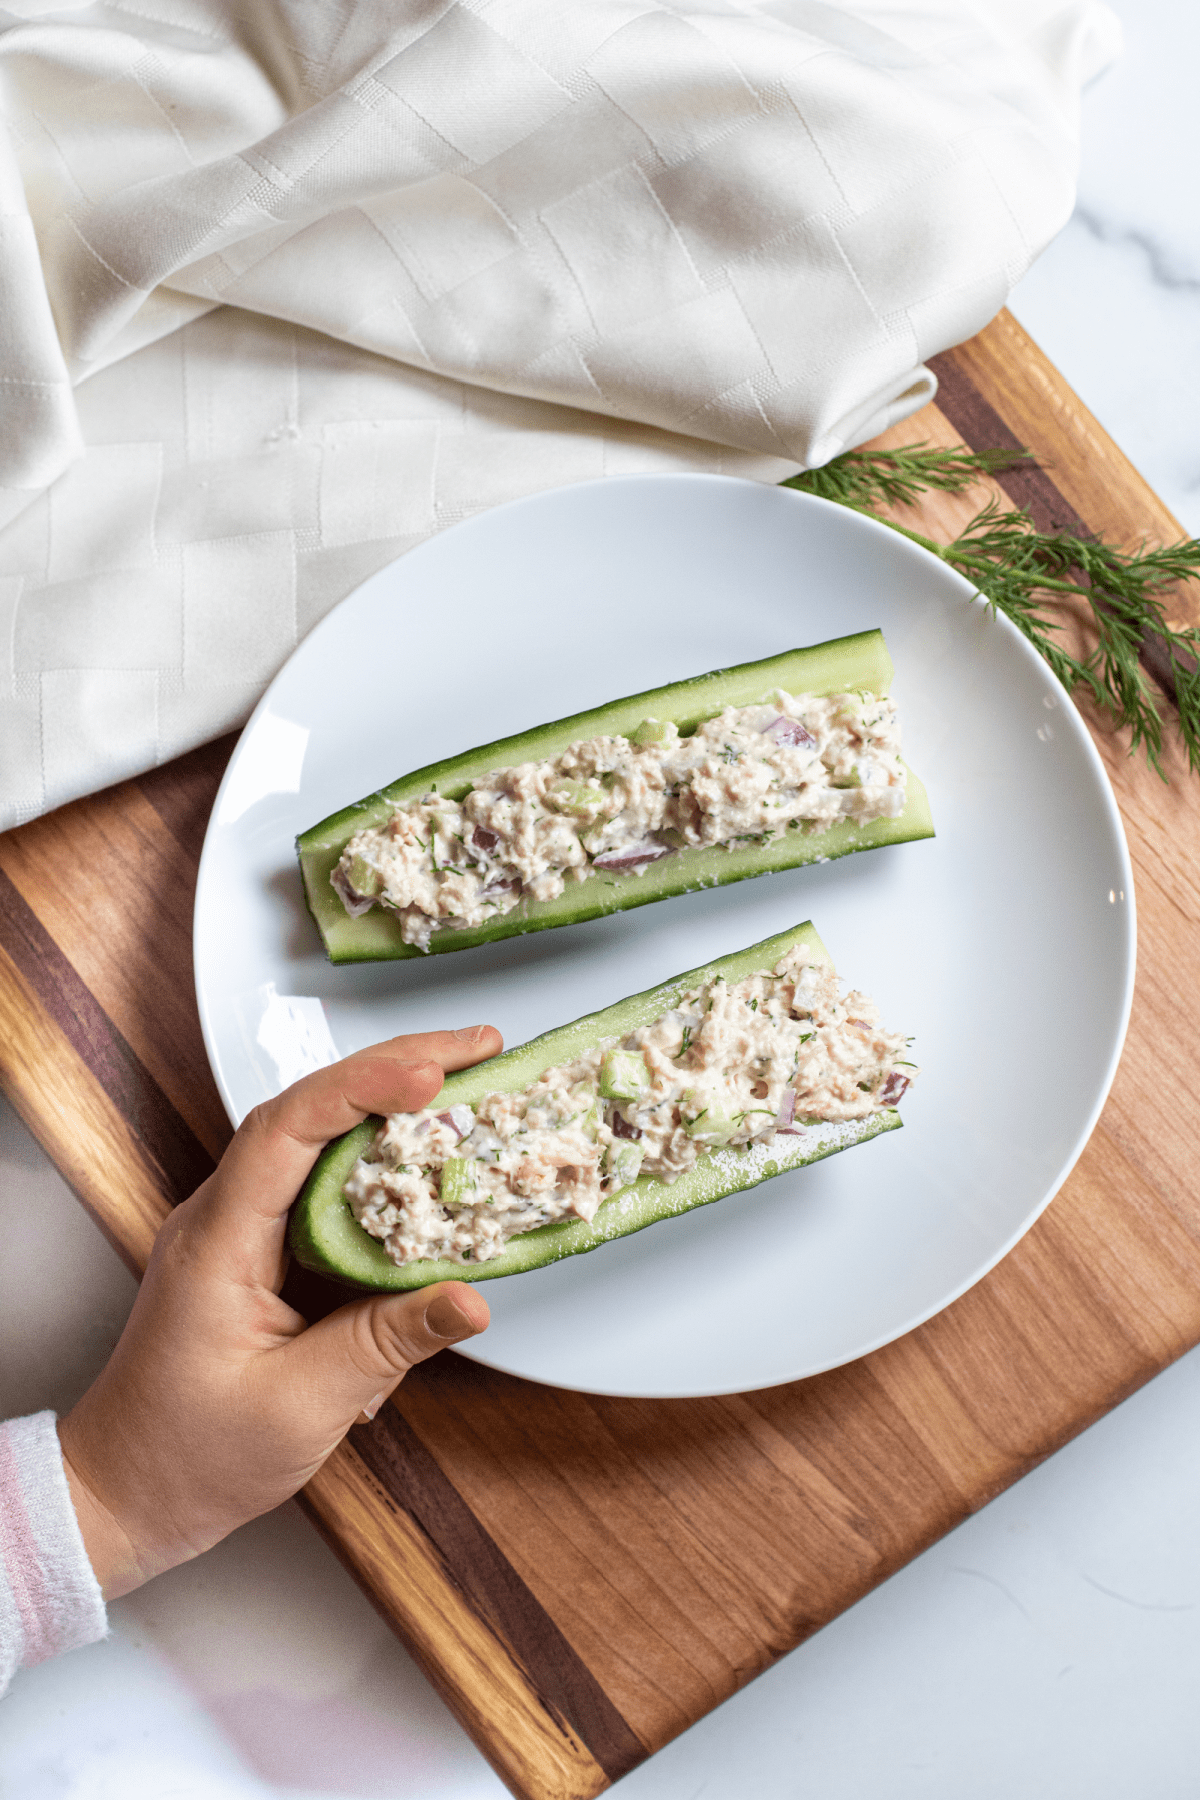 a kids hand holding a cucumber boat with tuna salad.